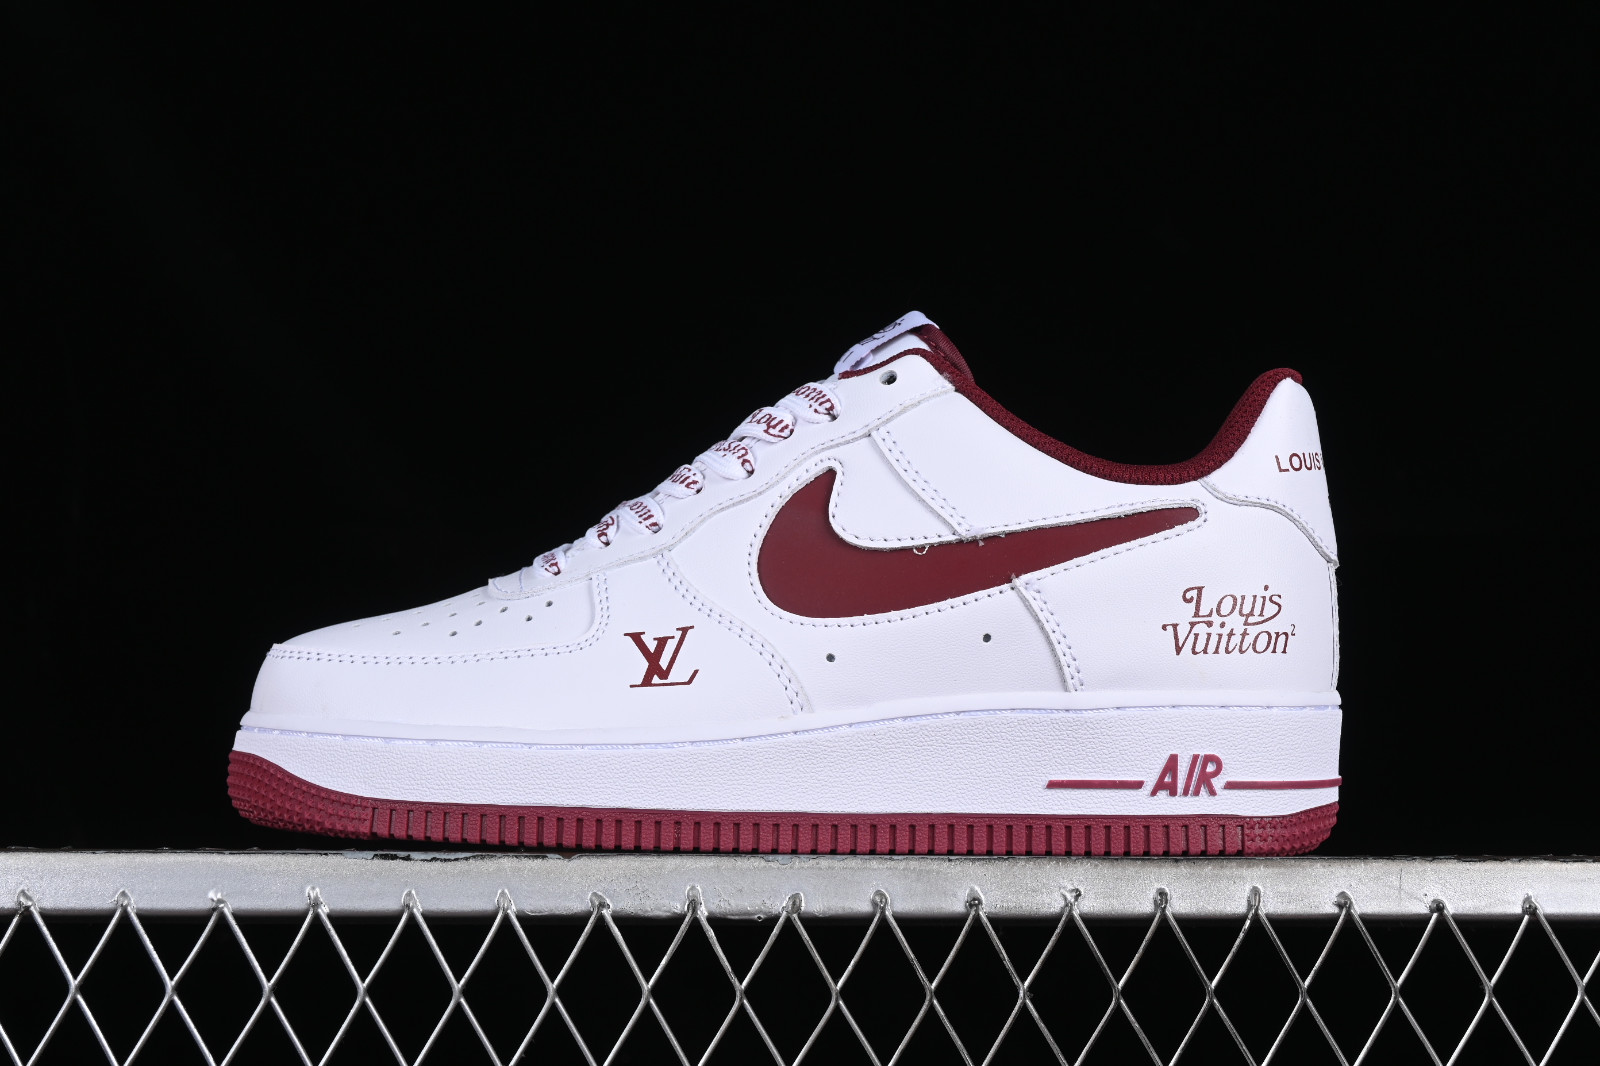 nike lebron 10 red suede for sale on  echo - 832 - Louis Vuitton x  Nike Air Force 1 07 Low White Dark Red LV1898 - GmarShops